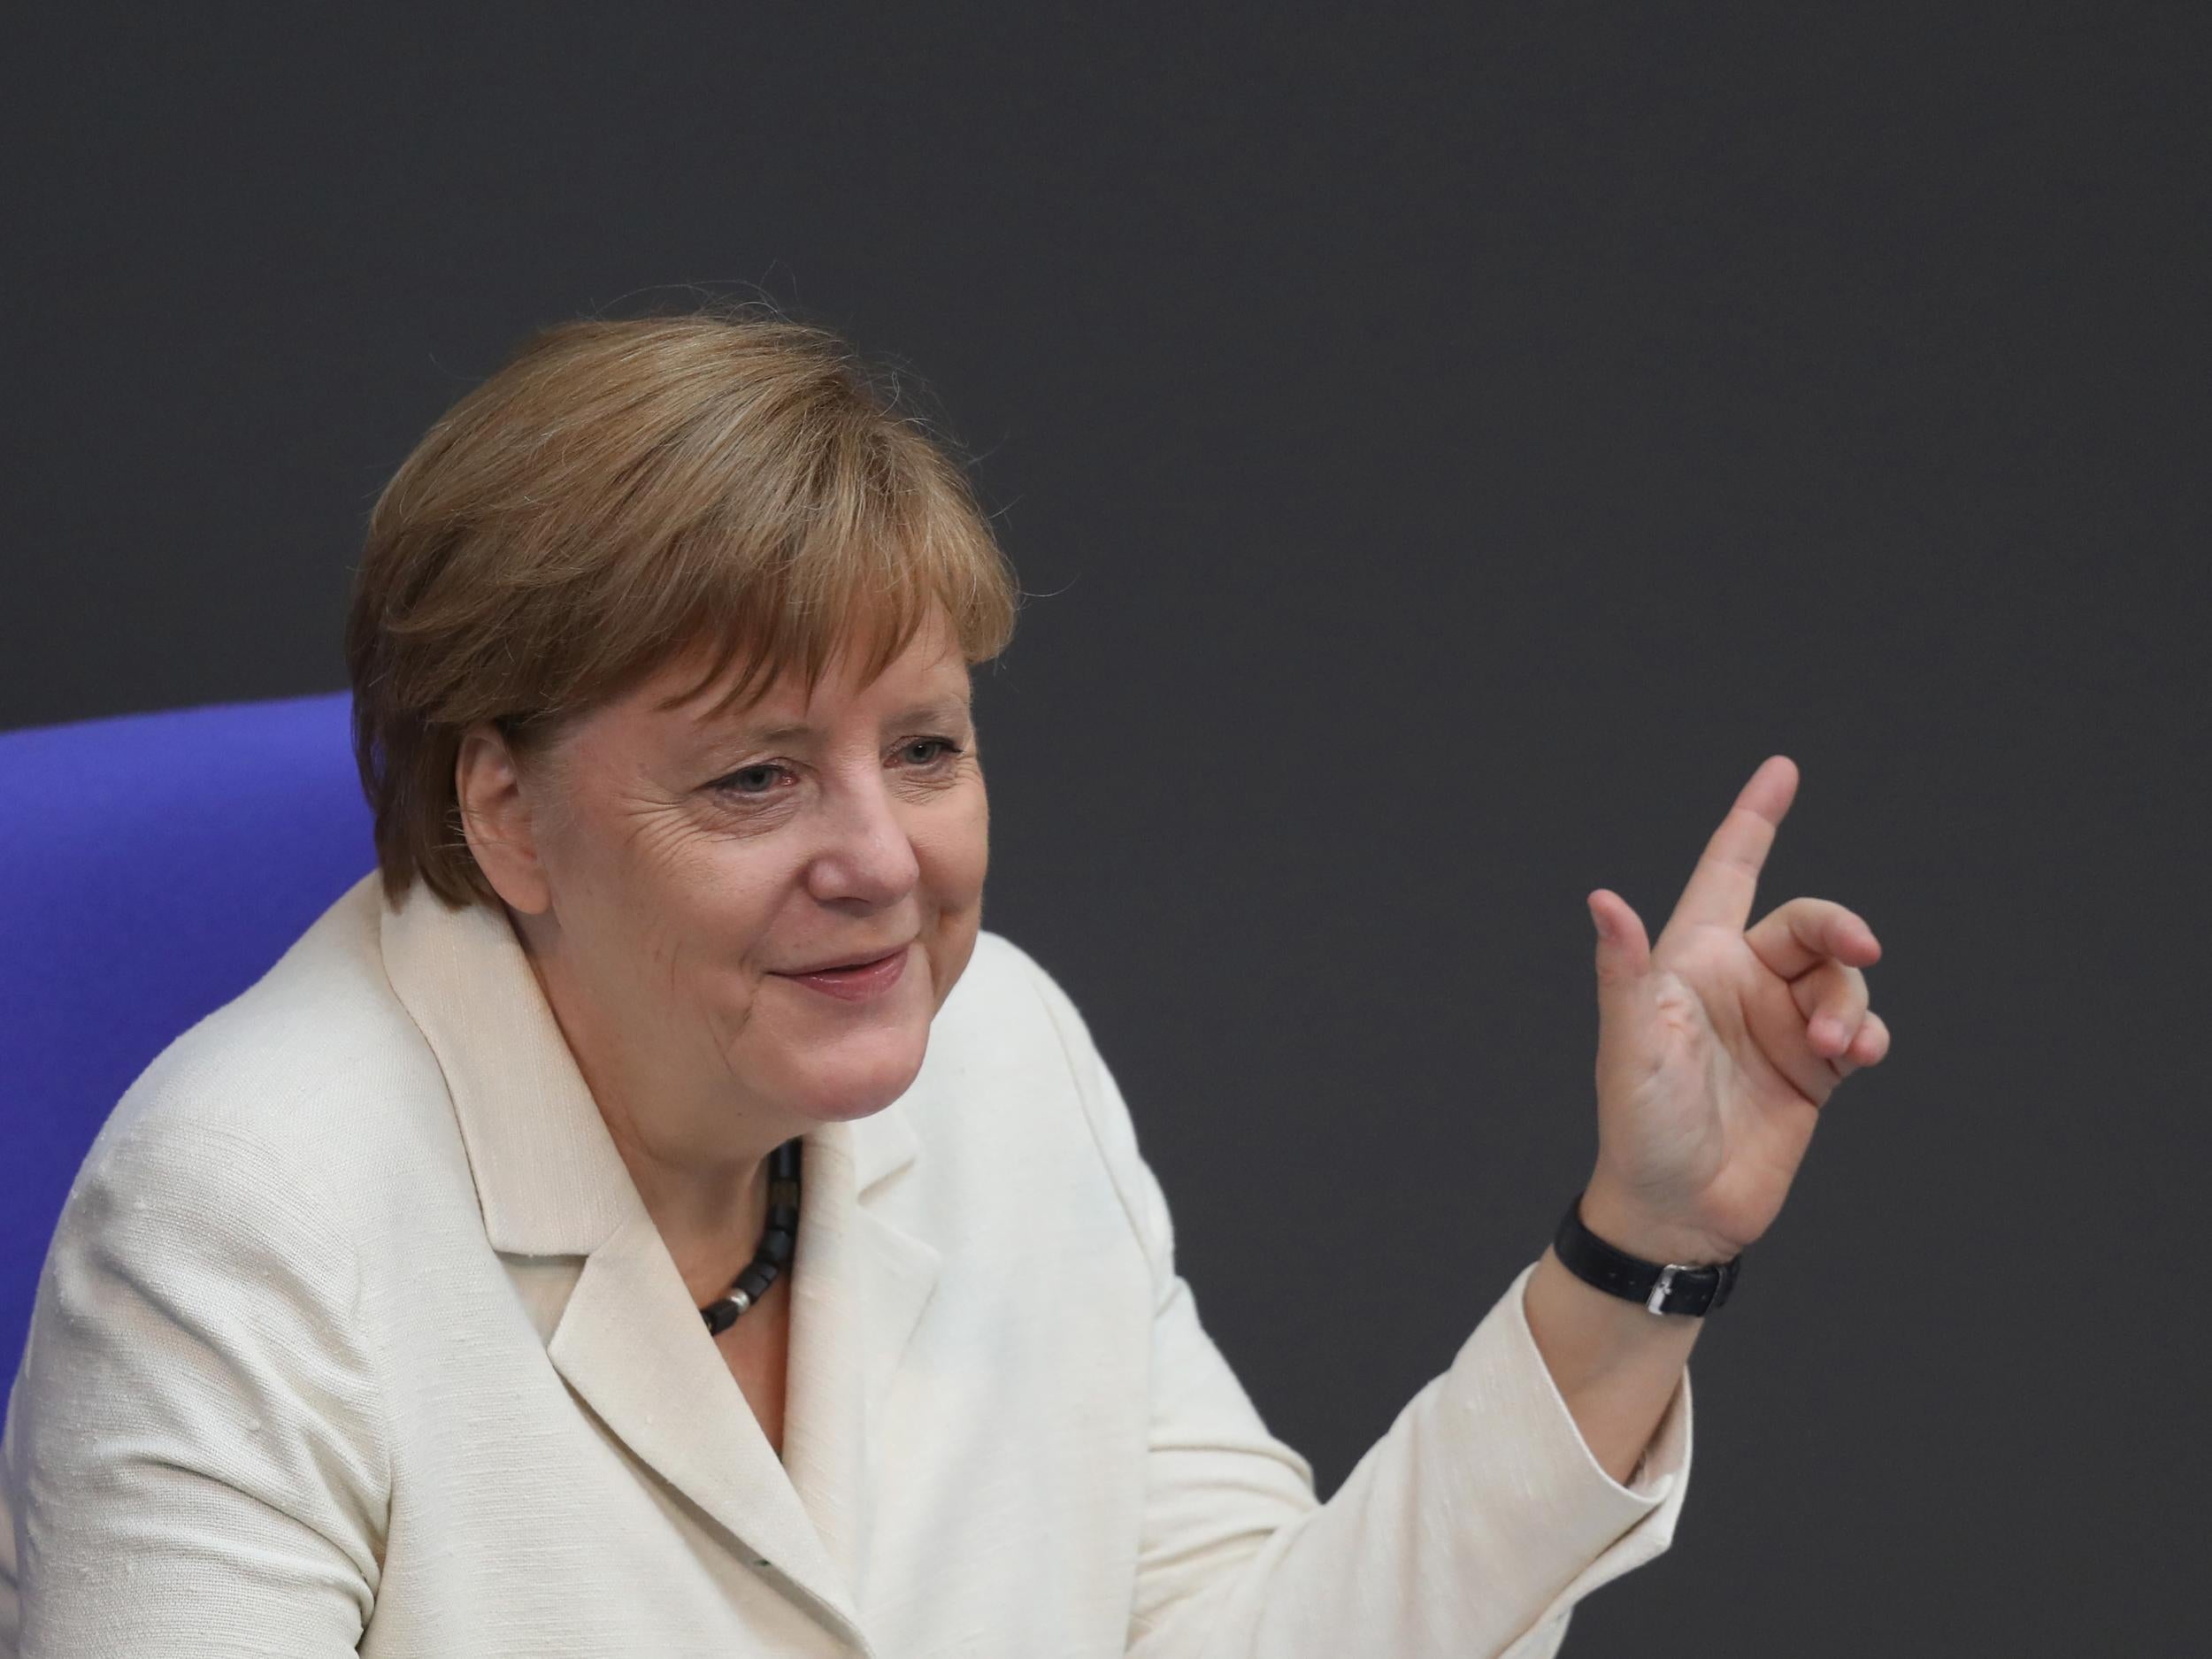 Angela Merkel has enjoyed a rise in support since the Brexit vote